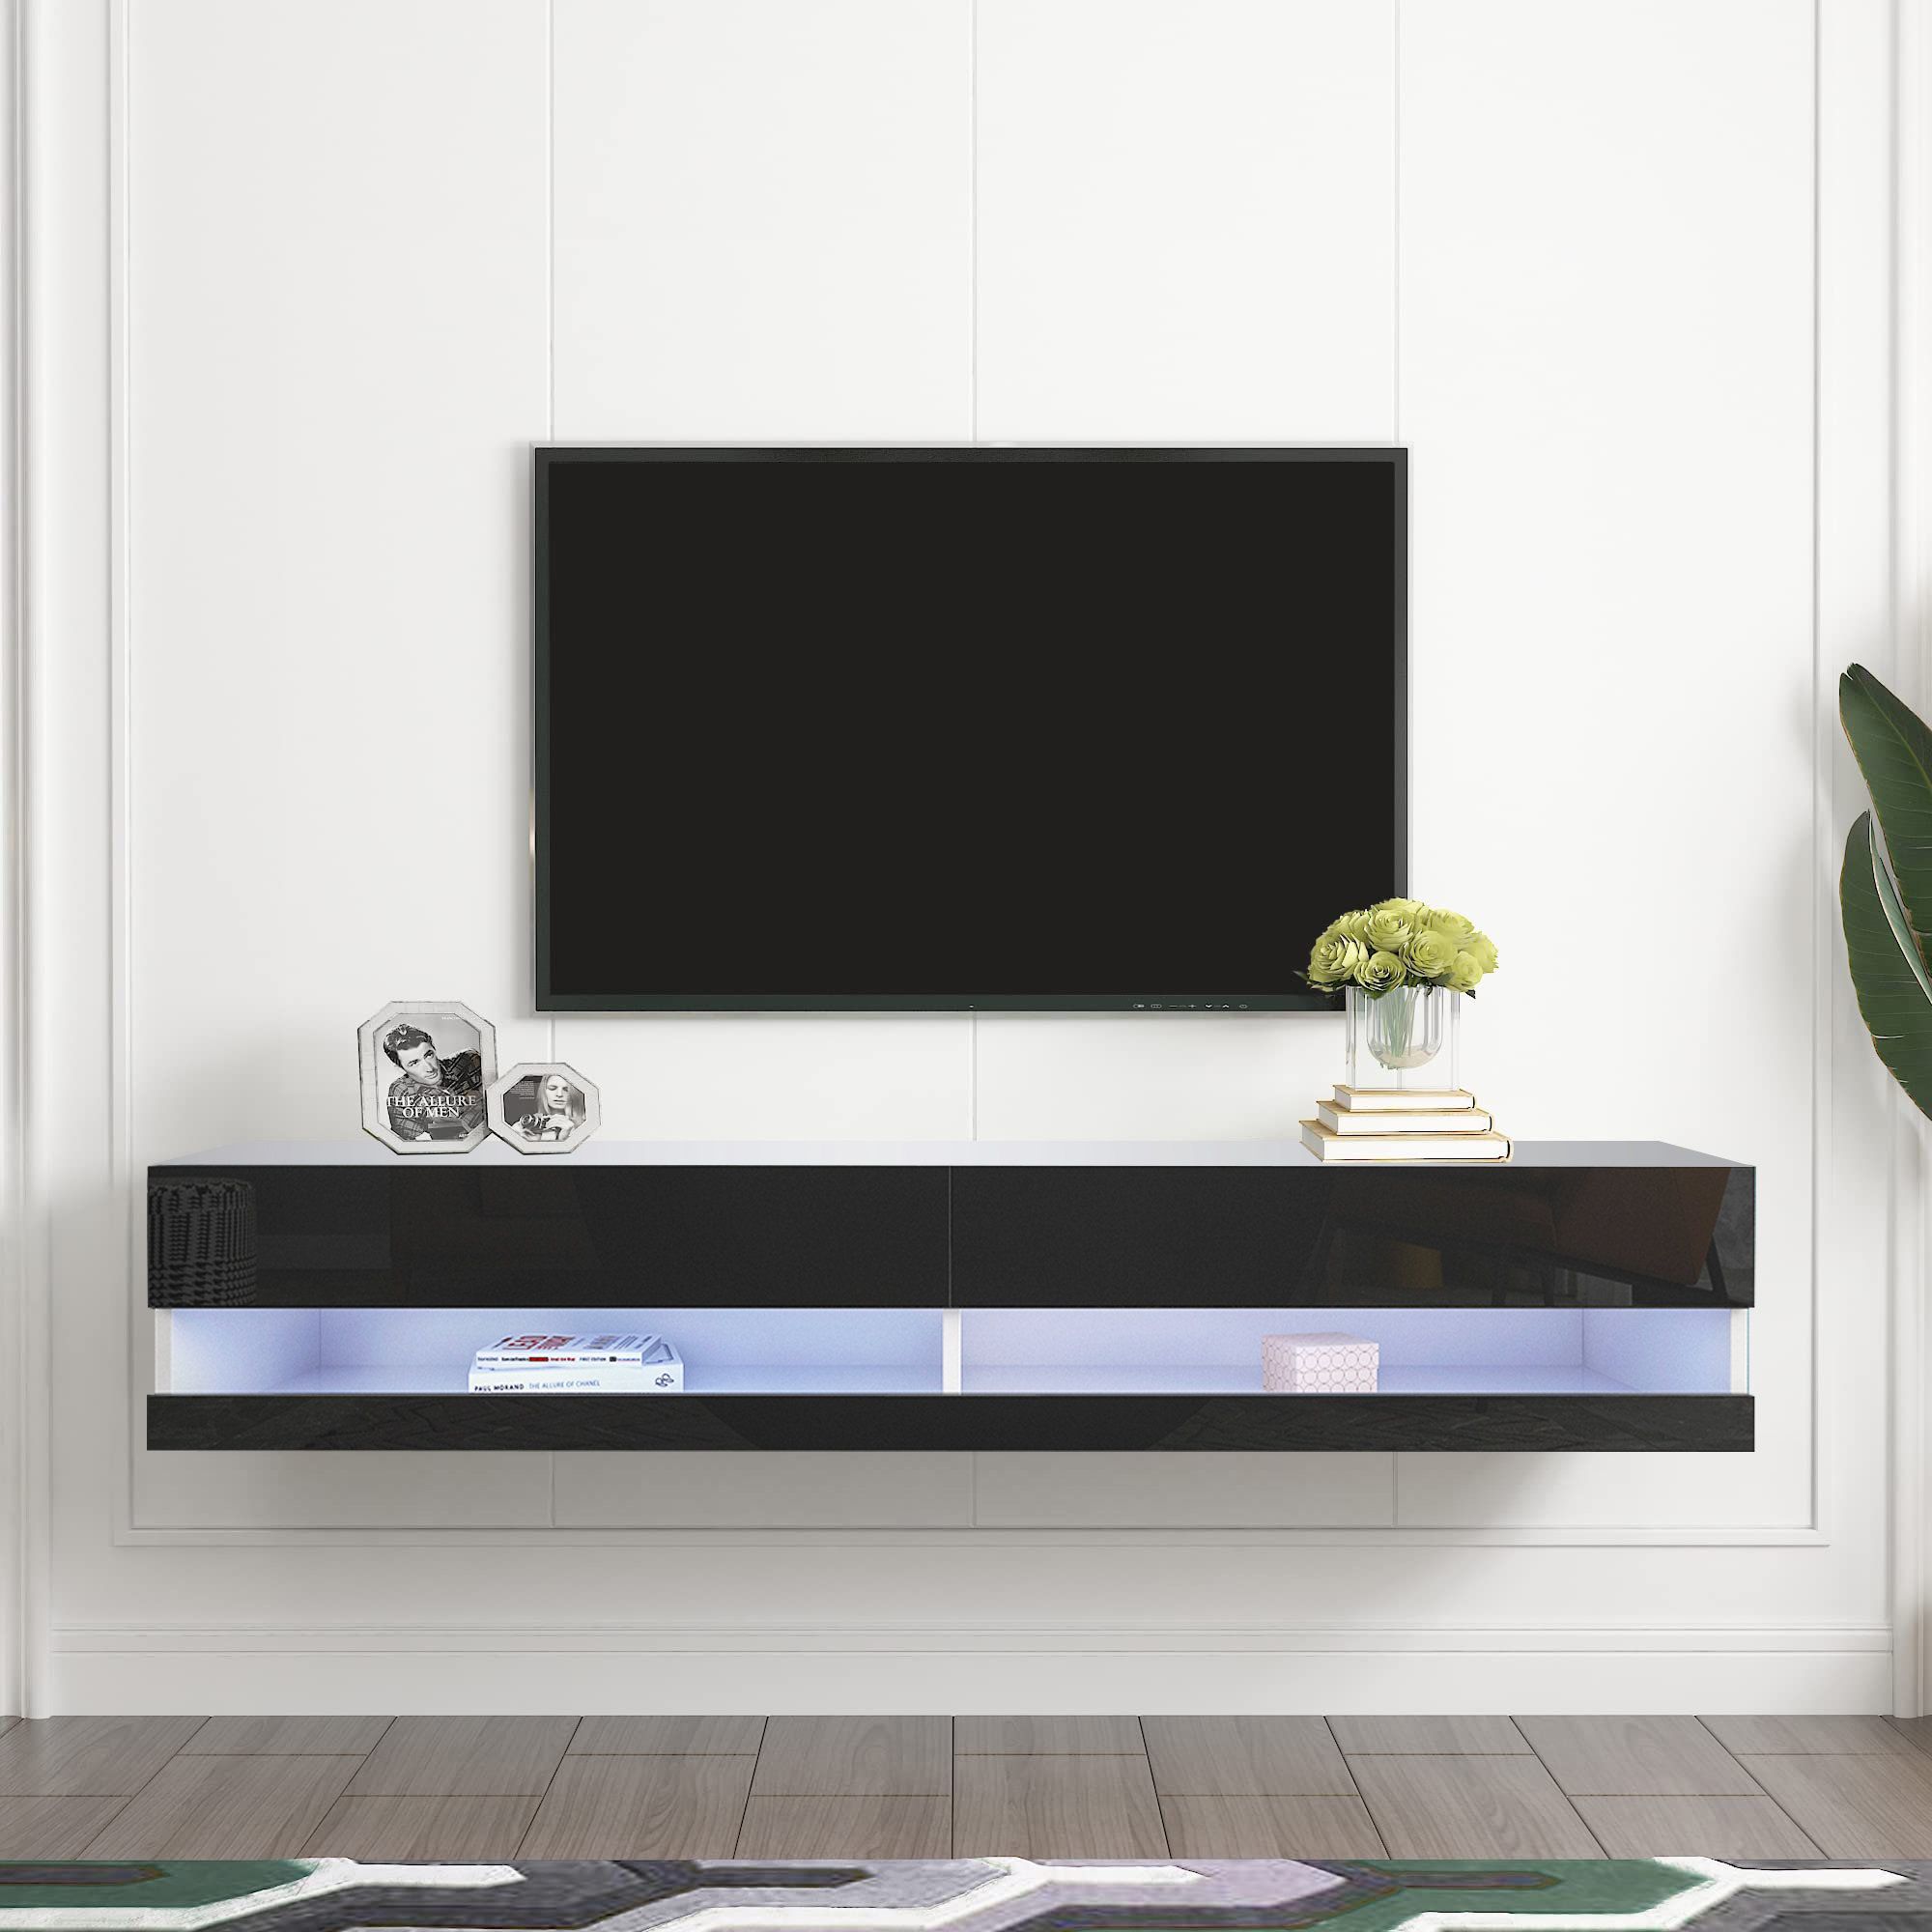 Ivy Bronx Floating Tv Stand Wall Mounted For 80"Tv, Entertainment Center  With 20 Colors Led Lights Add More Details (Optional) & Reviews | Wayfair With Regard To Wall Mounted Floating Tv Stands (View 5 of 15)